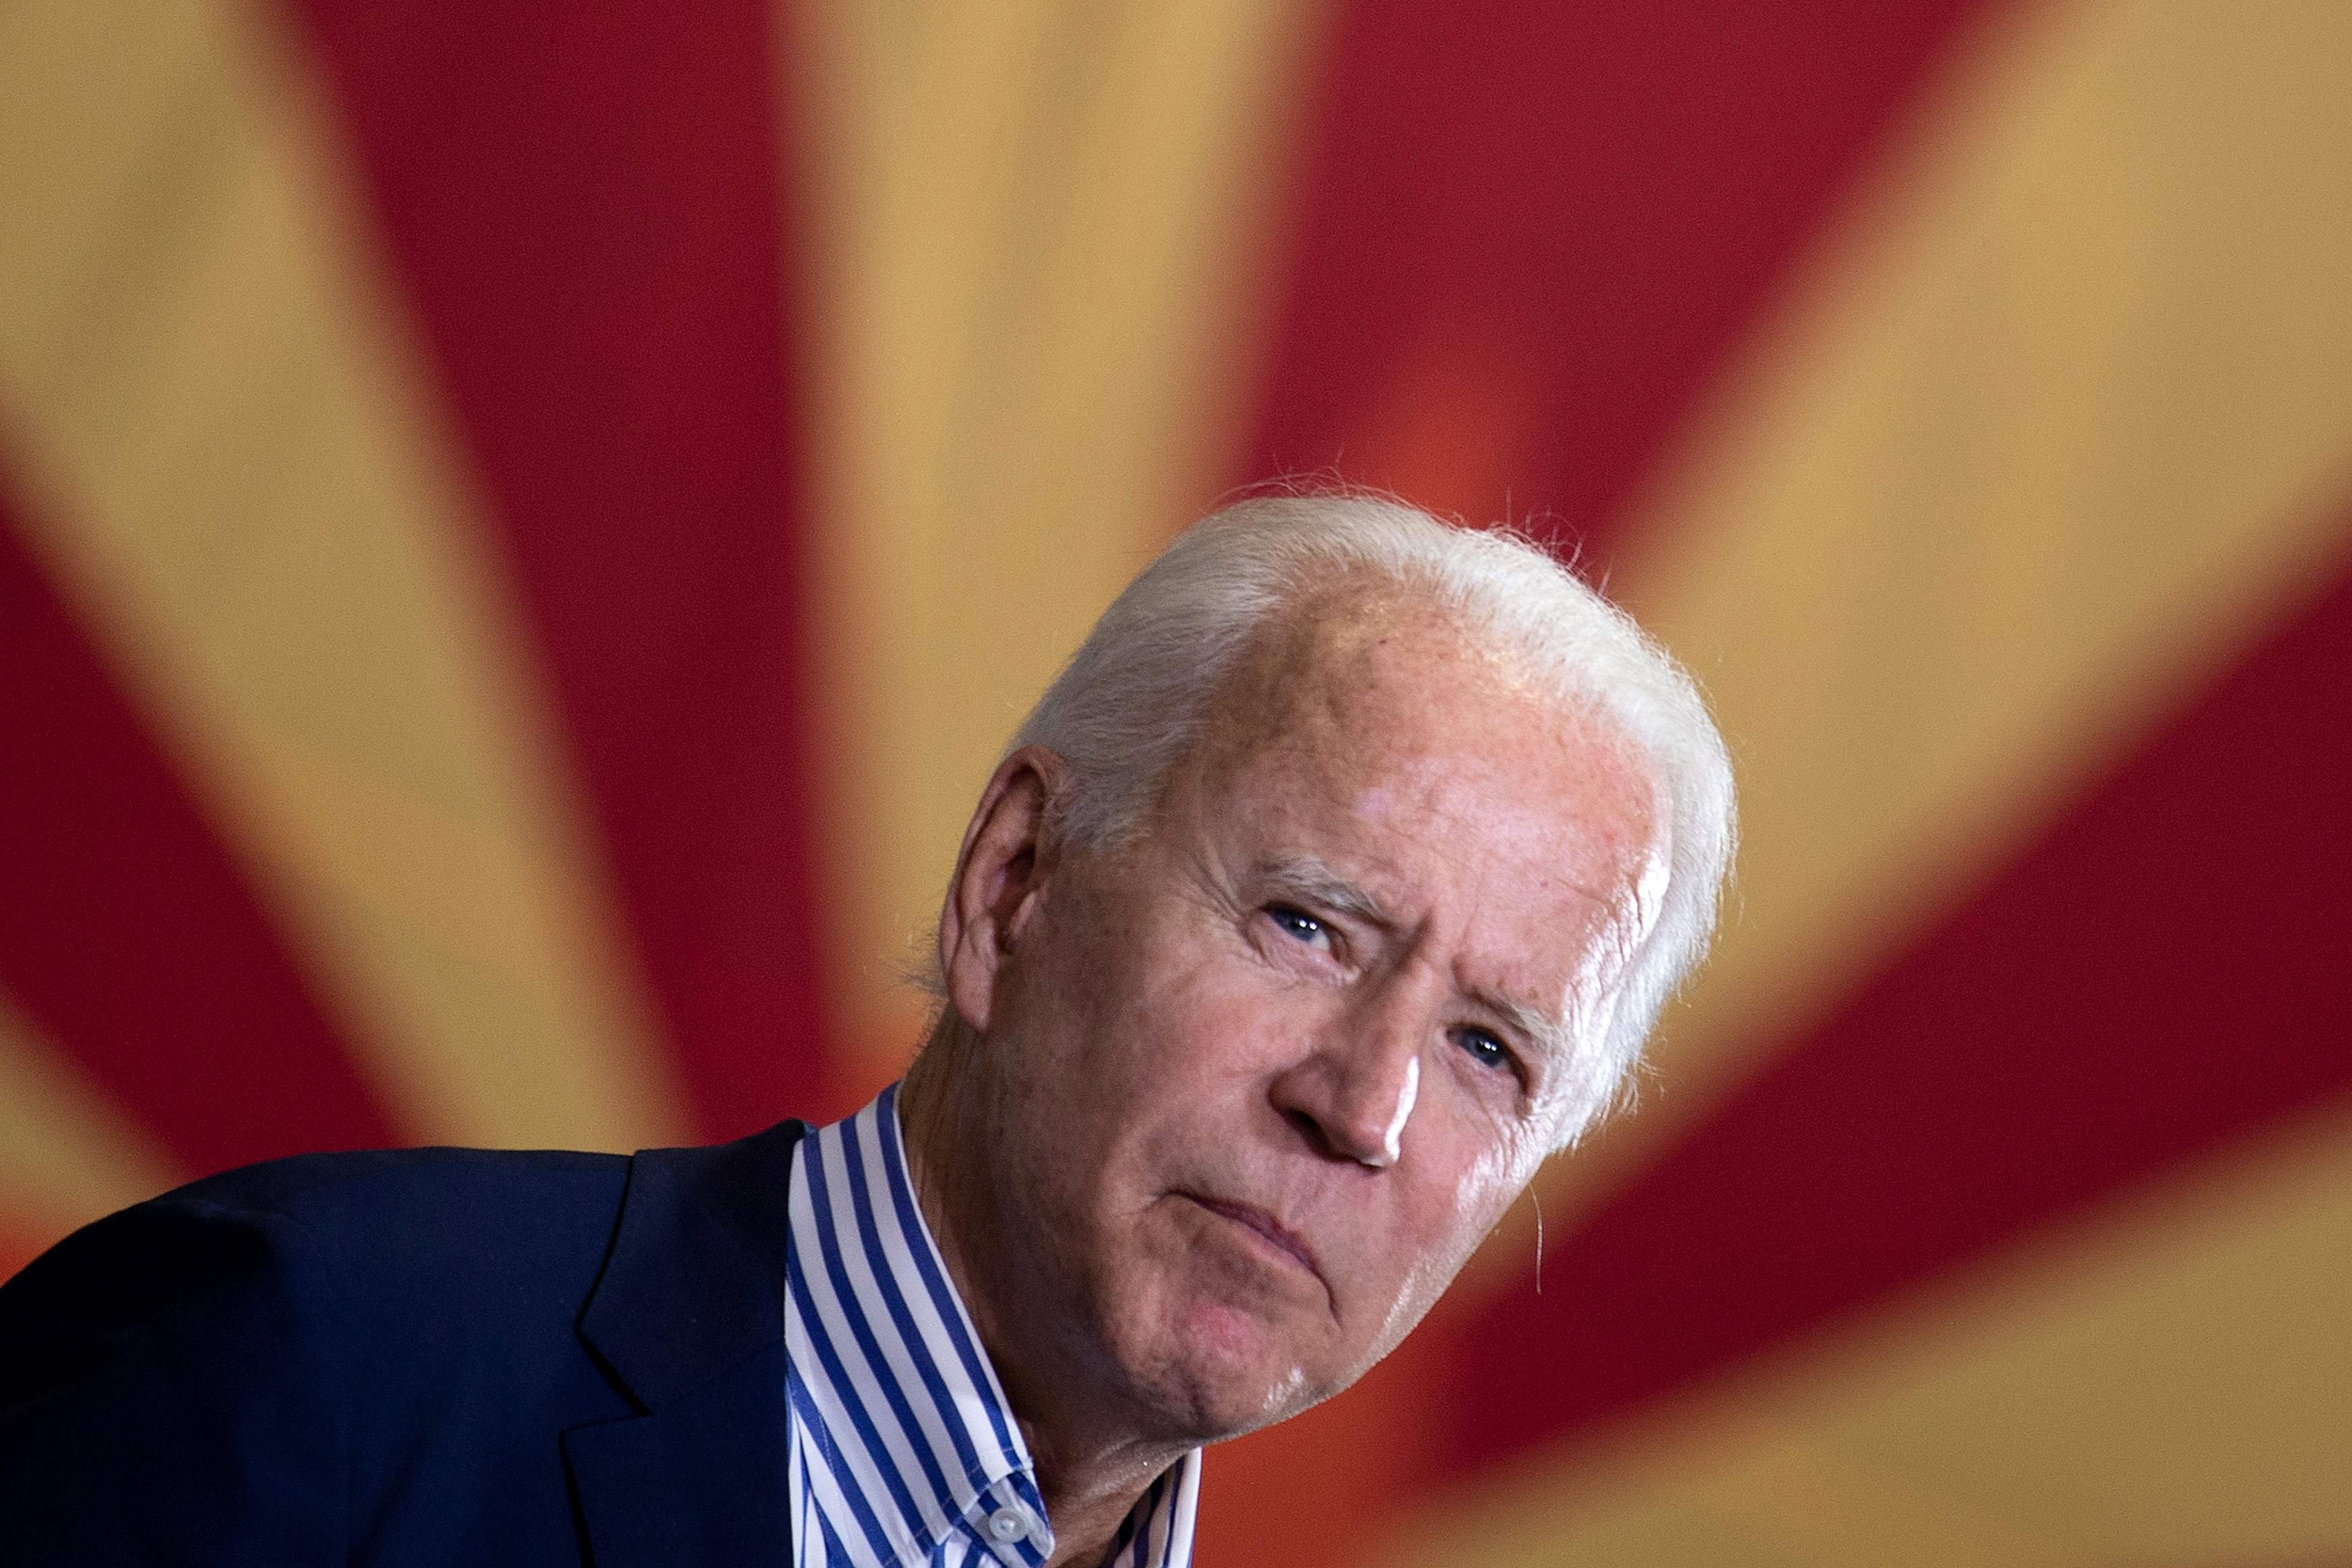 Understanding the Dynamics: Biden’s Remarks on Xi Jinping and China